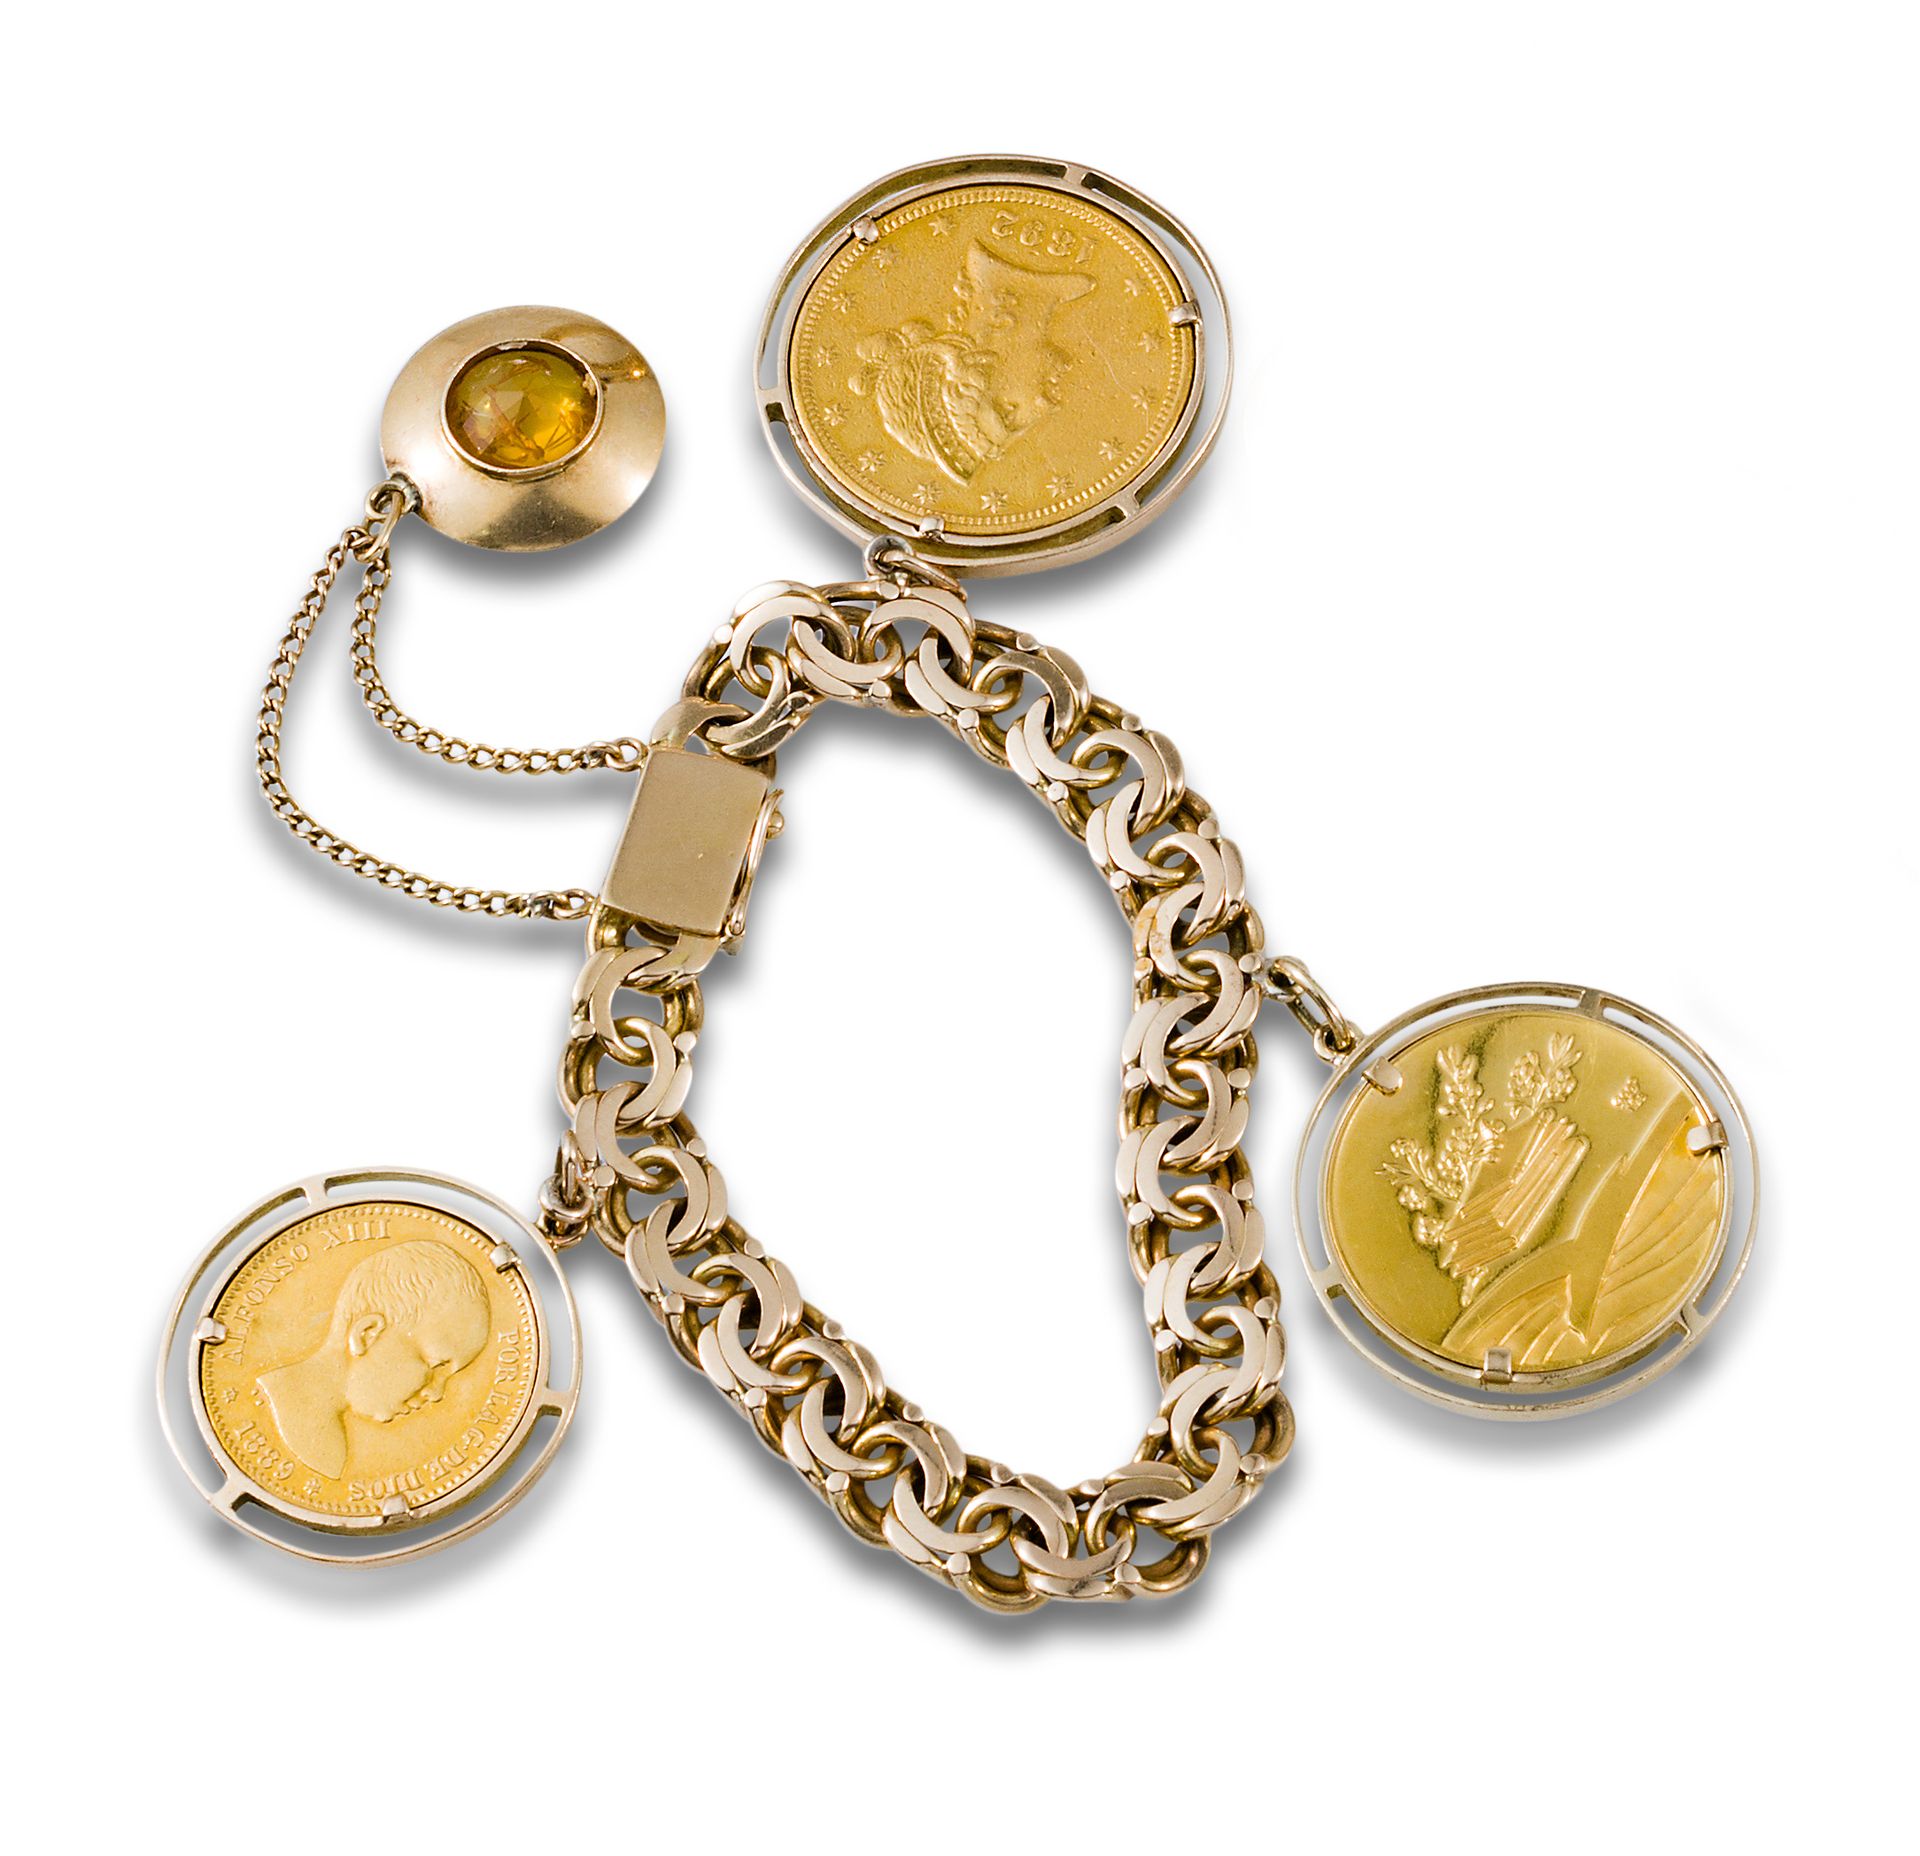 18kt yellow gold braided bracelet with coins and pendant charm. 18kt yellow gold&hellip;